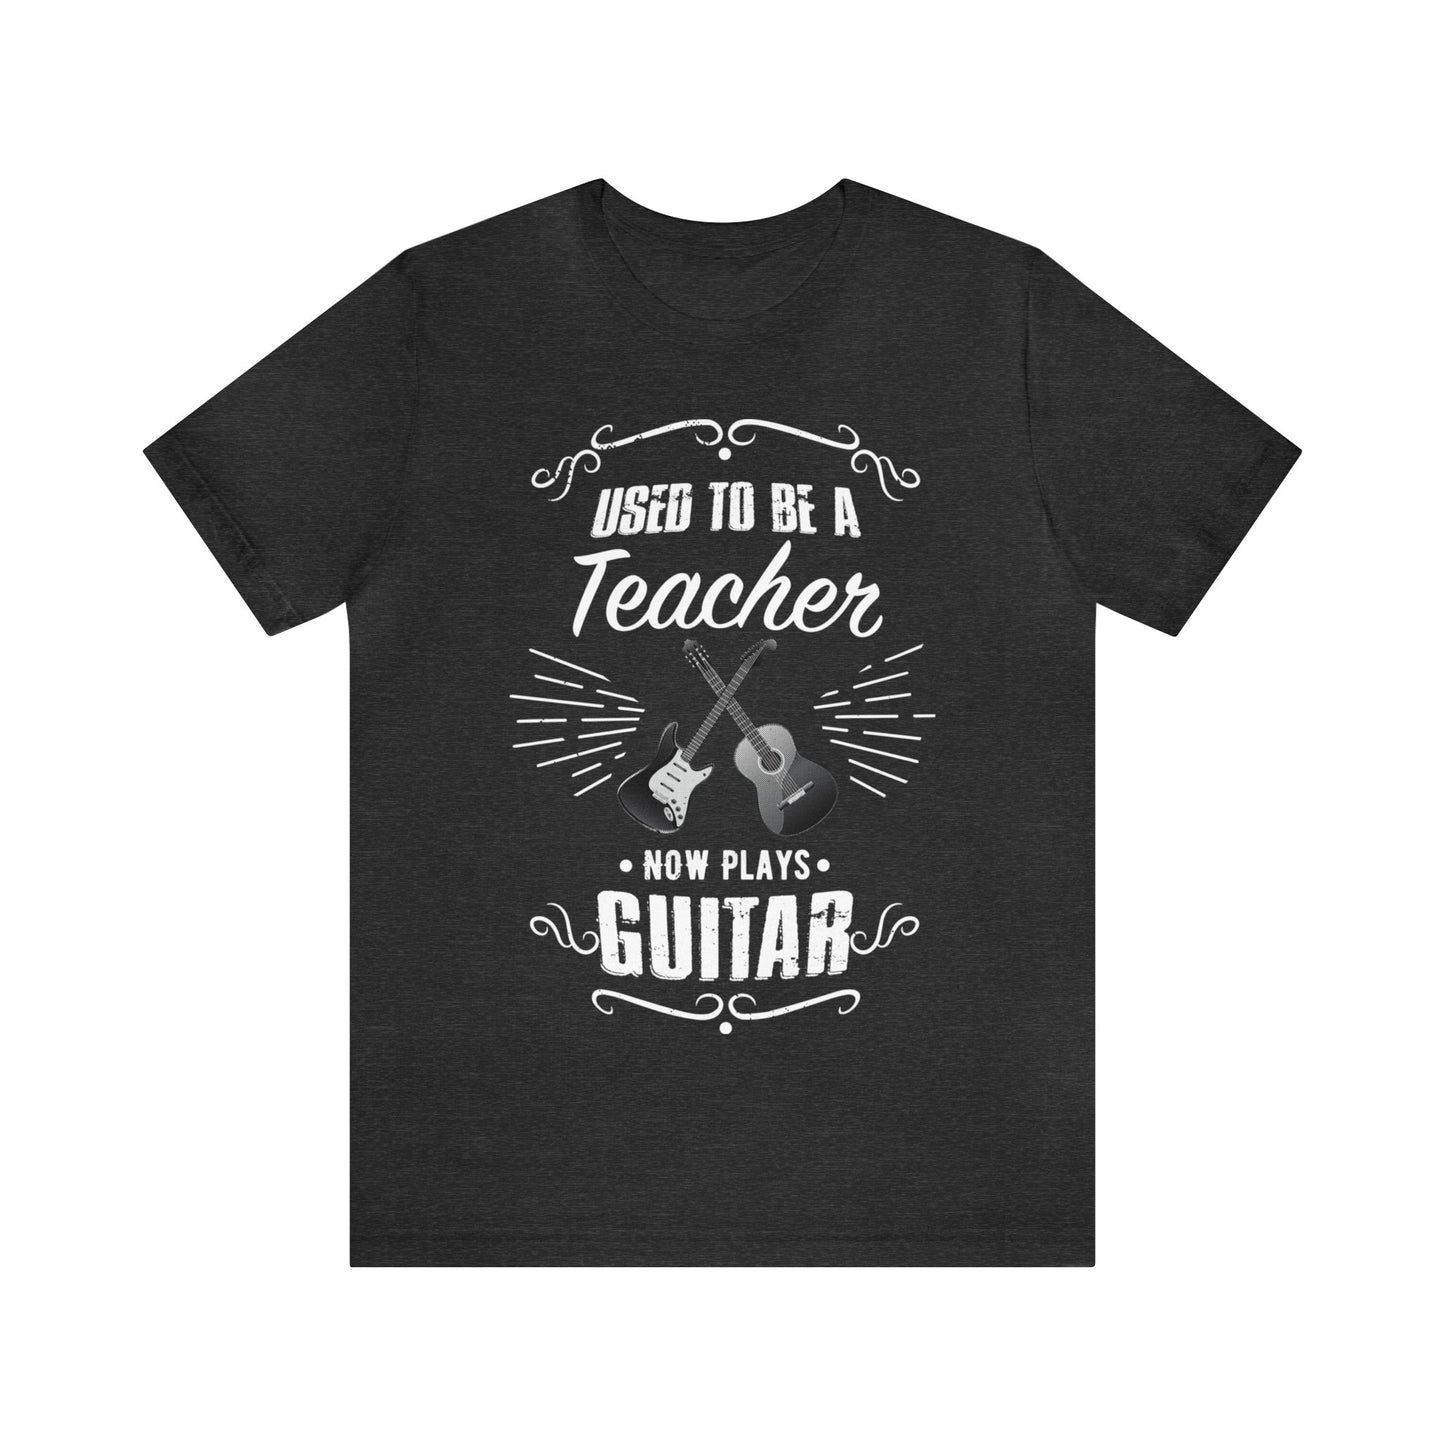 Used to be a TEACHER; Now Plays GUITAR - Funny Retirement Gift, Unisex T-shirt Bella+Canvas 3001, dark shirt colors for amateur musician/guitar player